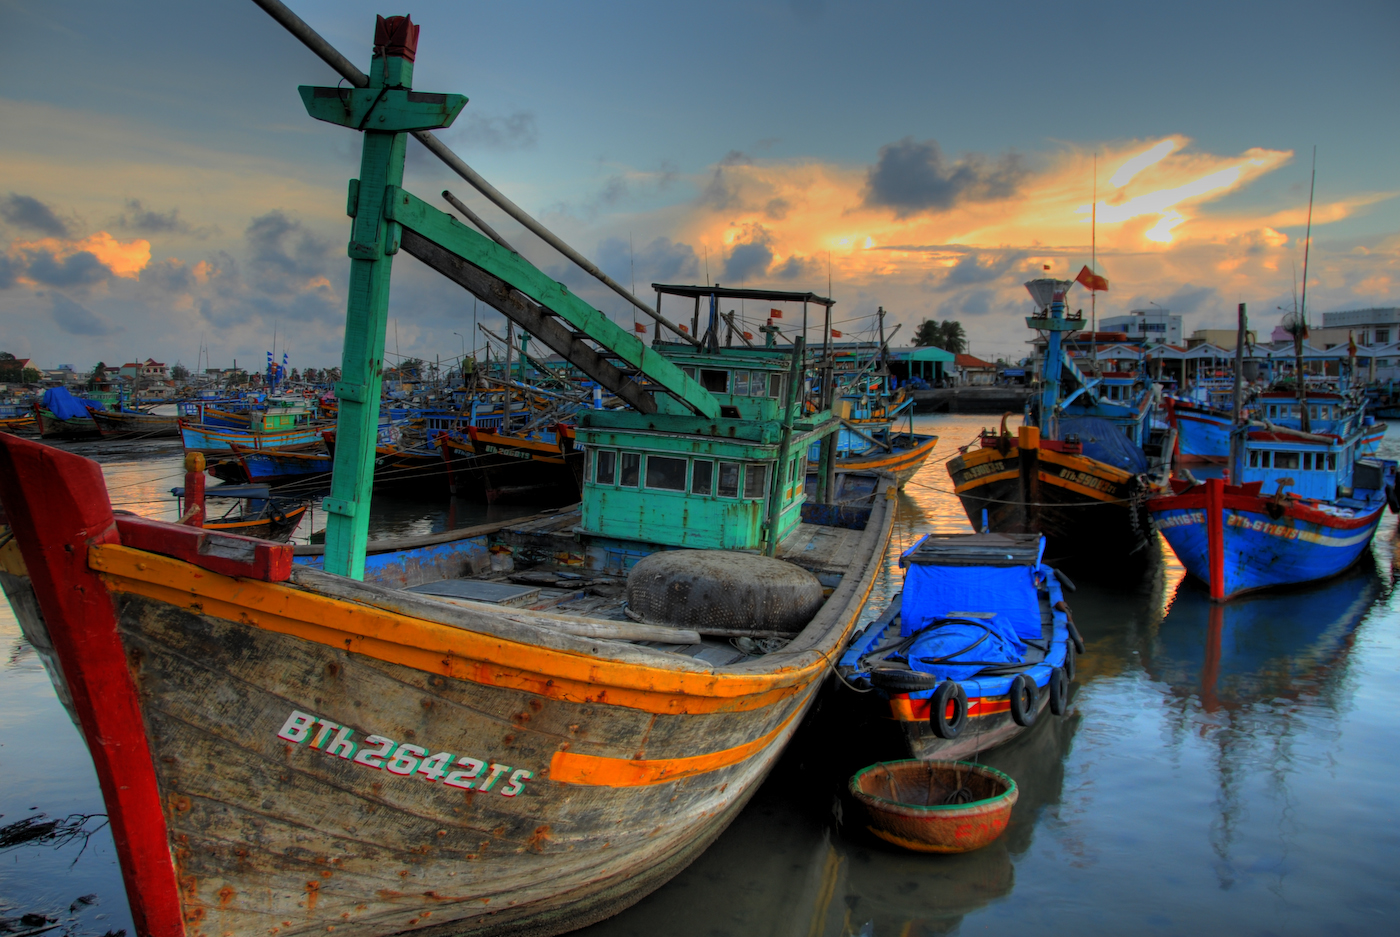 Much of the world's shrimp supply comes from small ports like these lining the Vietnam coast along the East Sea. / fishing militia